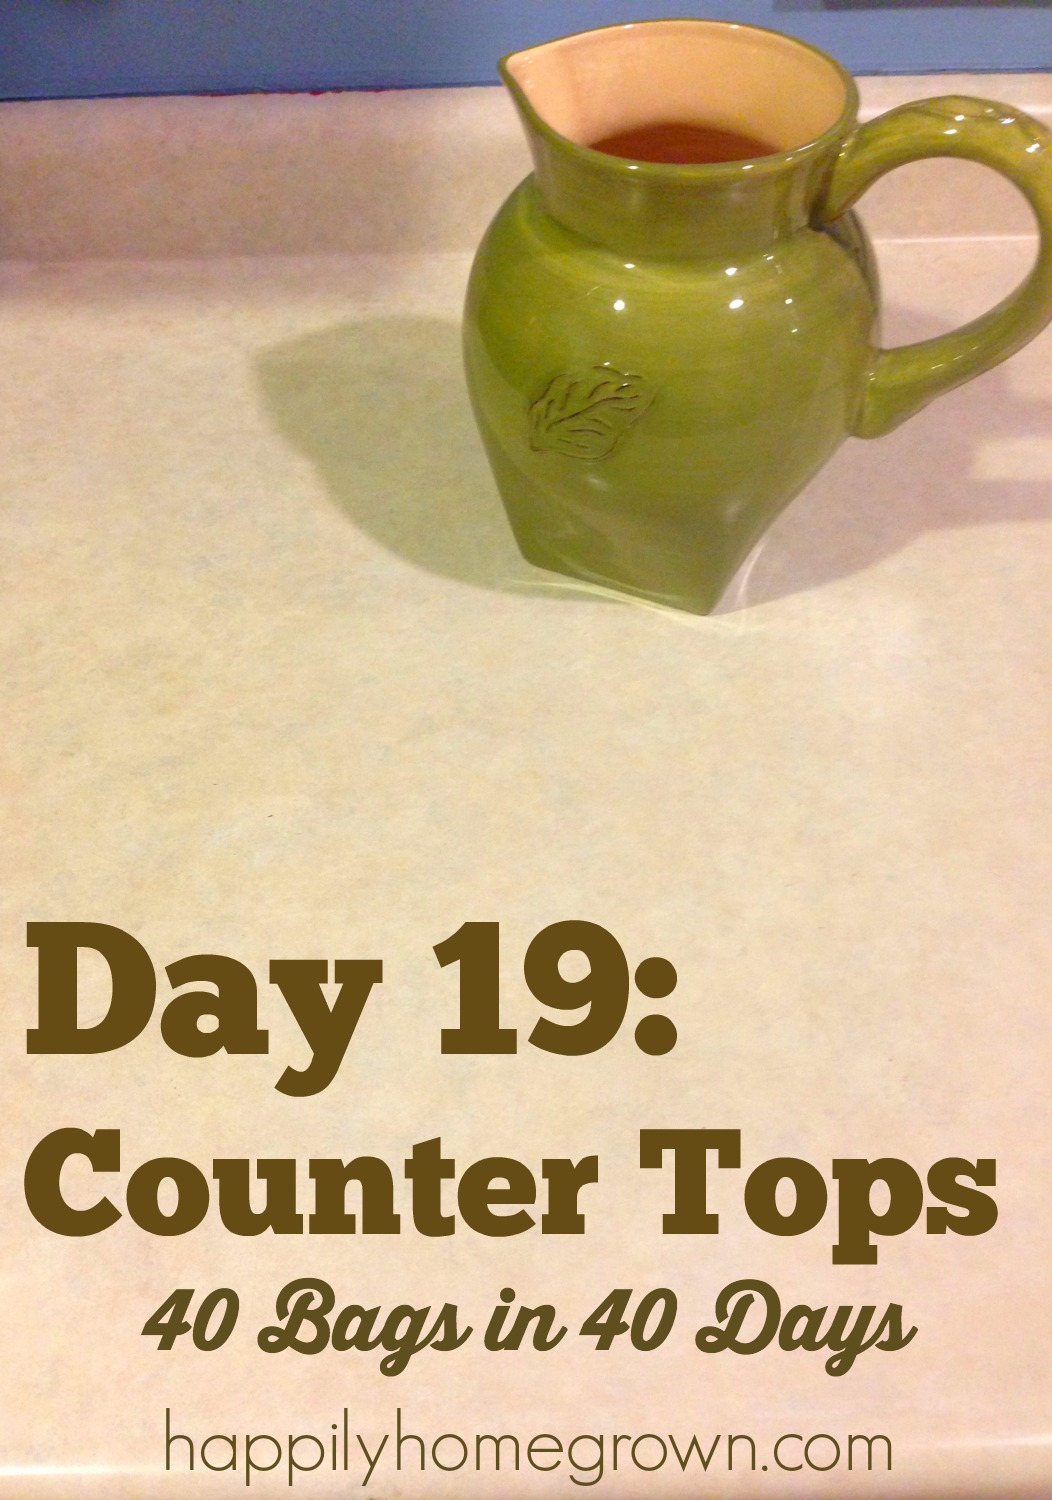 Day 19 counter tops